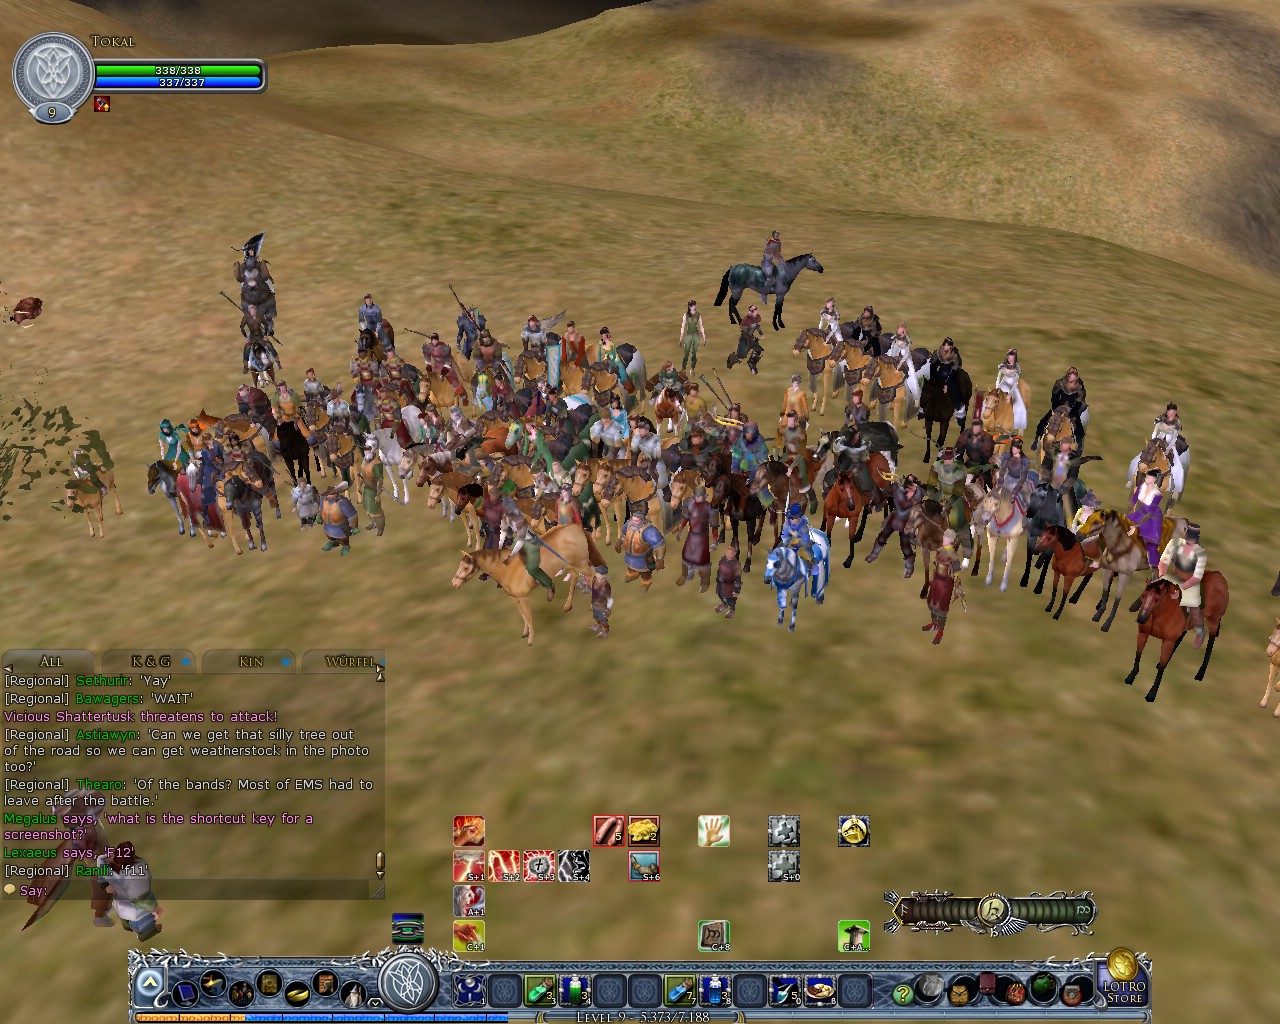 Image: The long procession walking from Weathertop to Bree 11